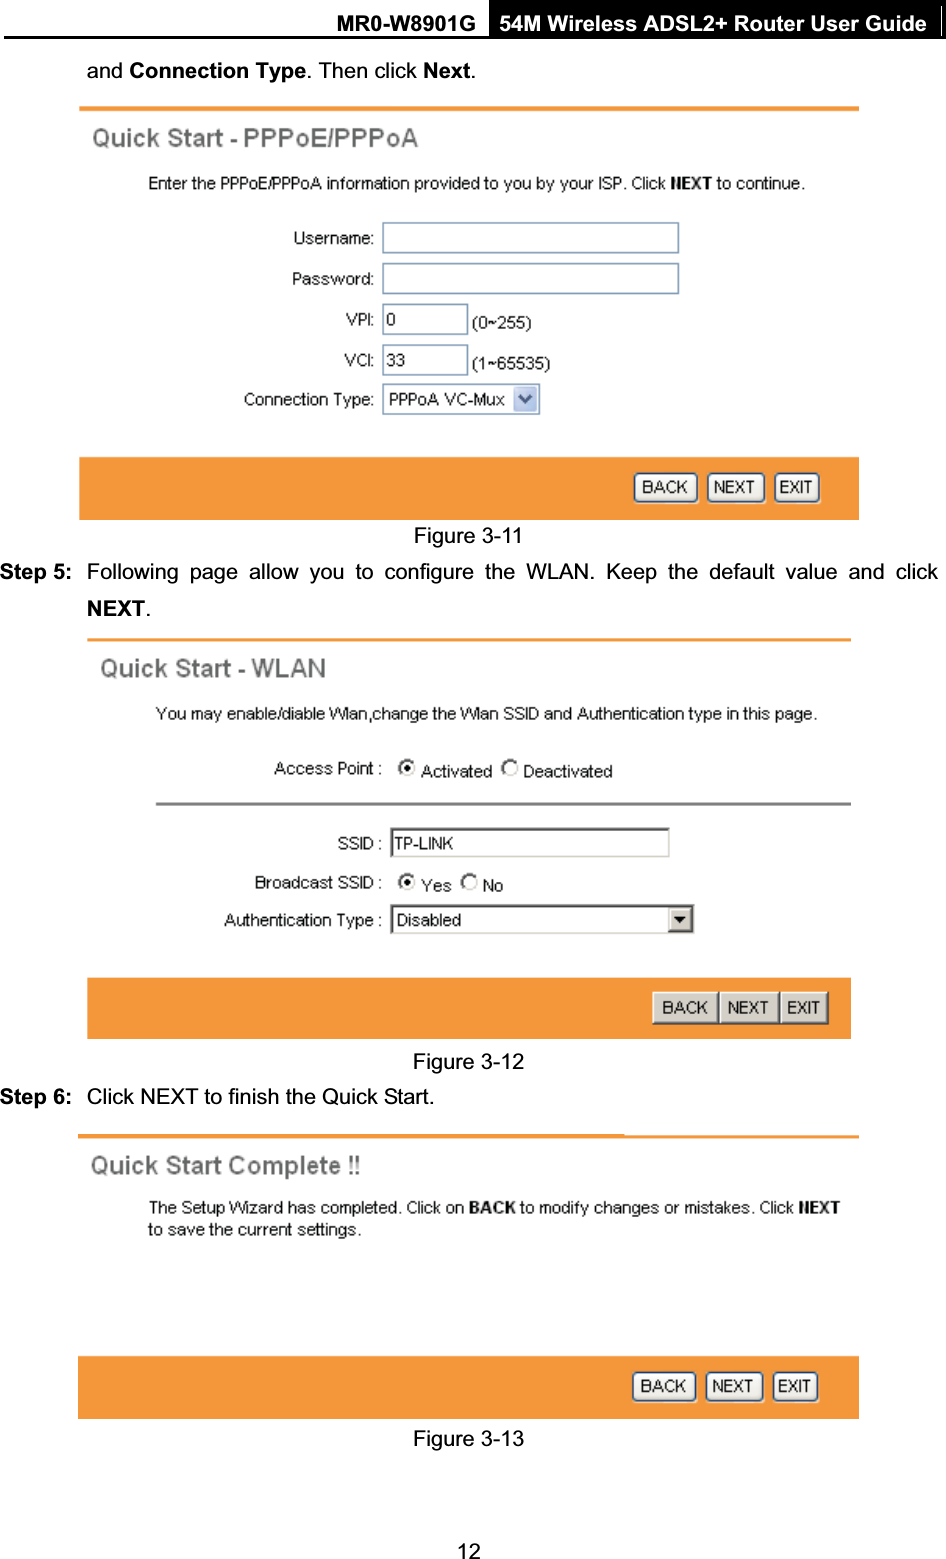 MR0-W8901G 54M Wireless ADSL2+ Router User Guide12and Connection Type. Then click Next.Figure 3-11 Step 5:  Following page allow you to configure the WLAN. Keep the default value and click NEXT.Figure 3-12 Step 6:  Click NEXT to finish the Quick Start. Figure 3-13 